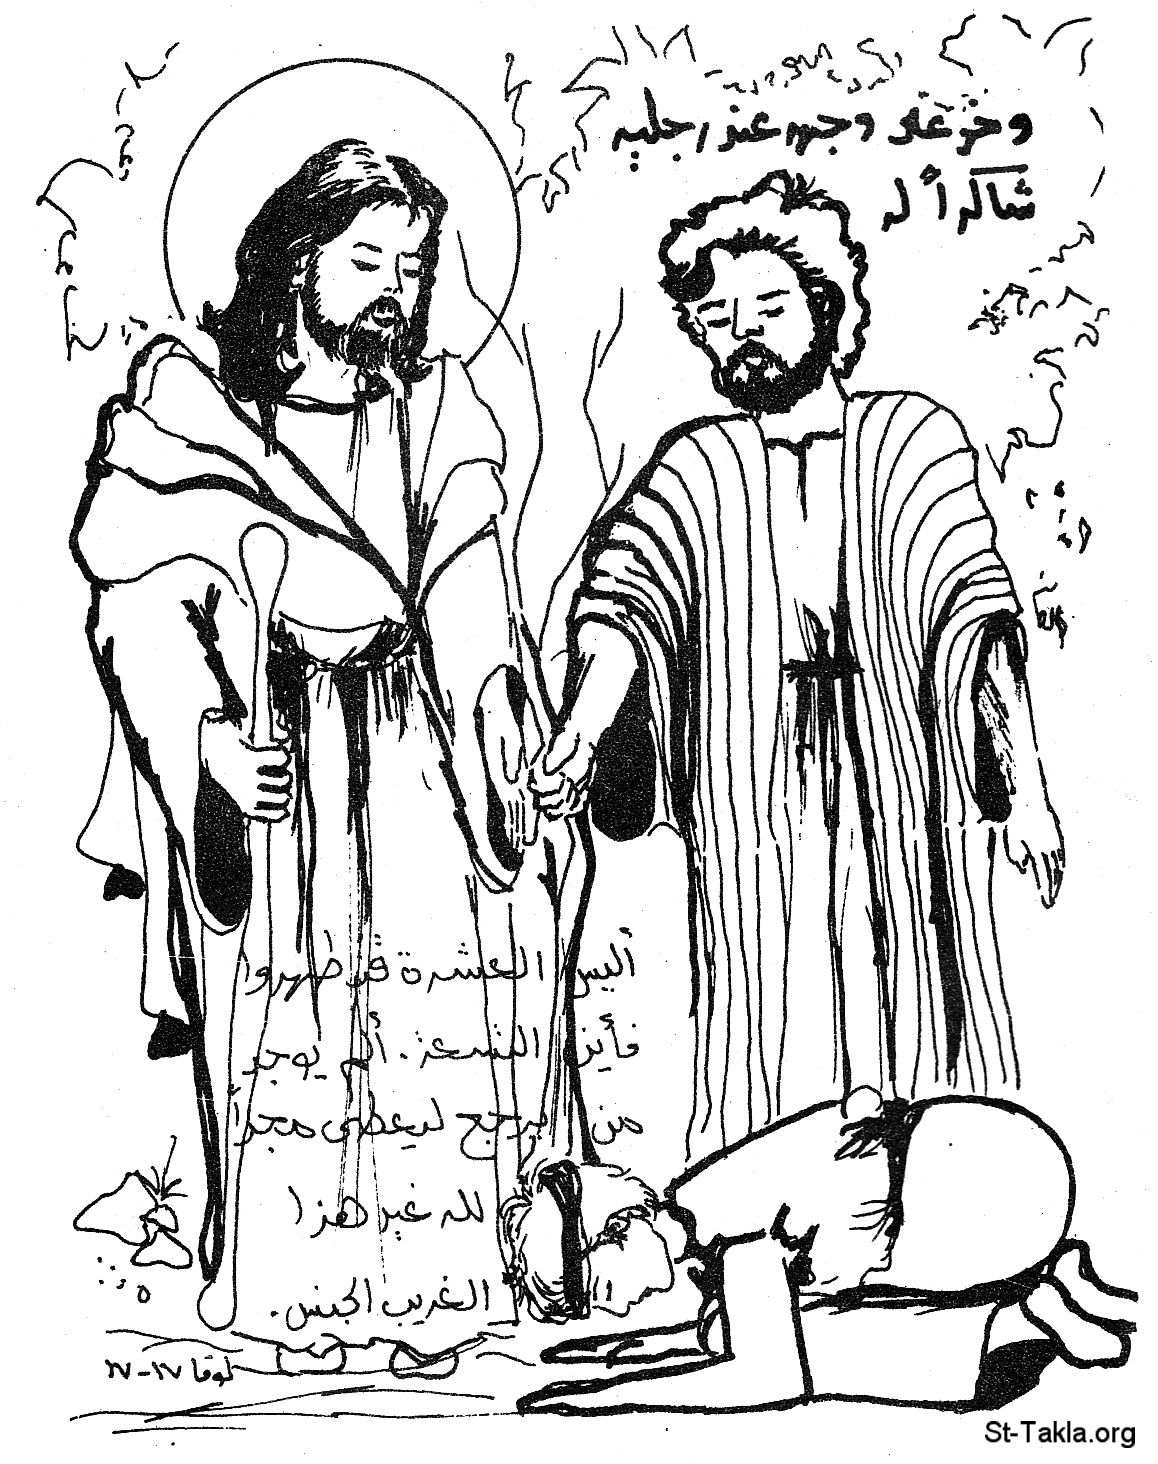 St-Takla.org Image: Jesus healing the ten lepers: The leper "fell down on his face at his feet, giving him thanks, and Jesus answering said, Were there not ten cleansed? but where are the nine?" (Lu 17:15-17)     :       :  "         :    ǿ  ɿ!" ( 17: 15-17)